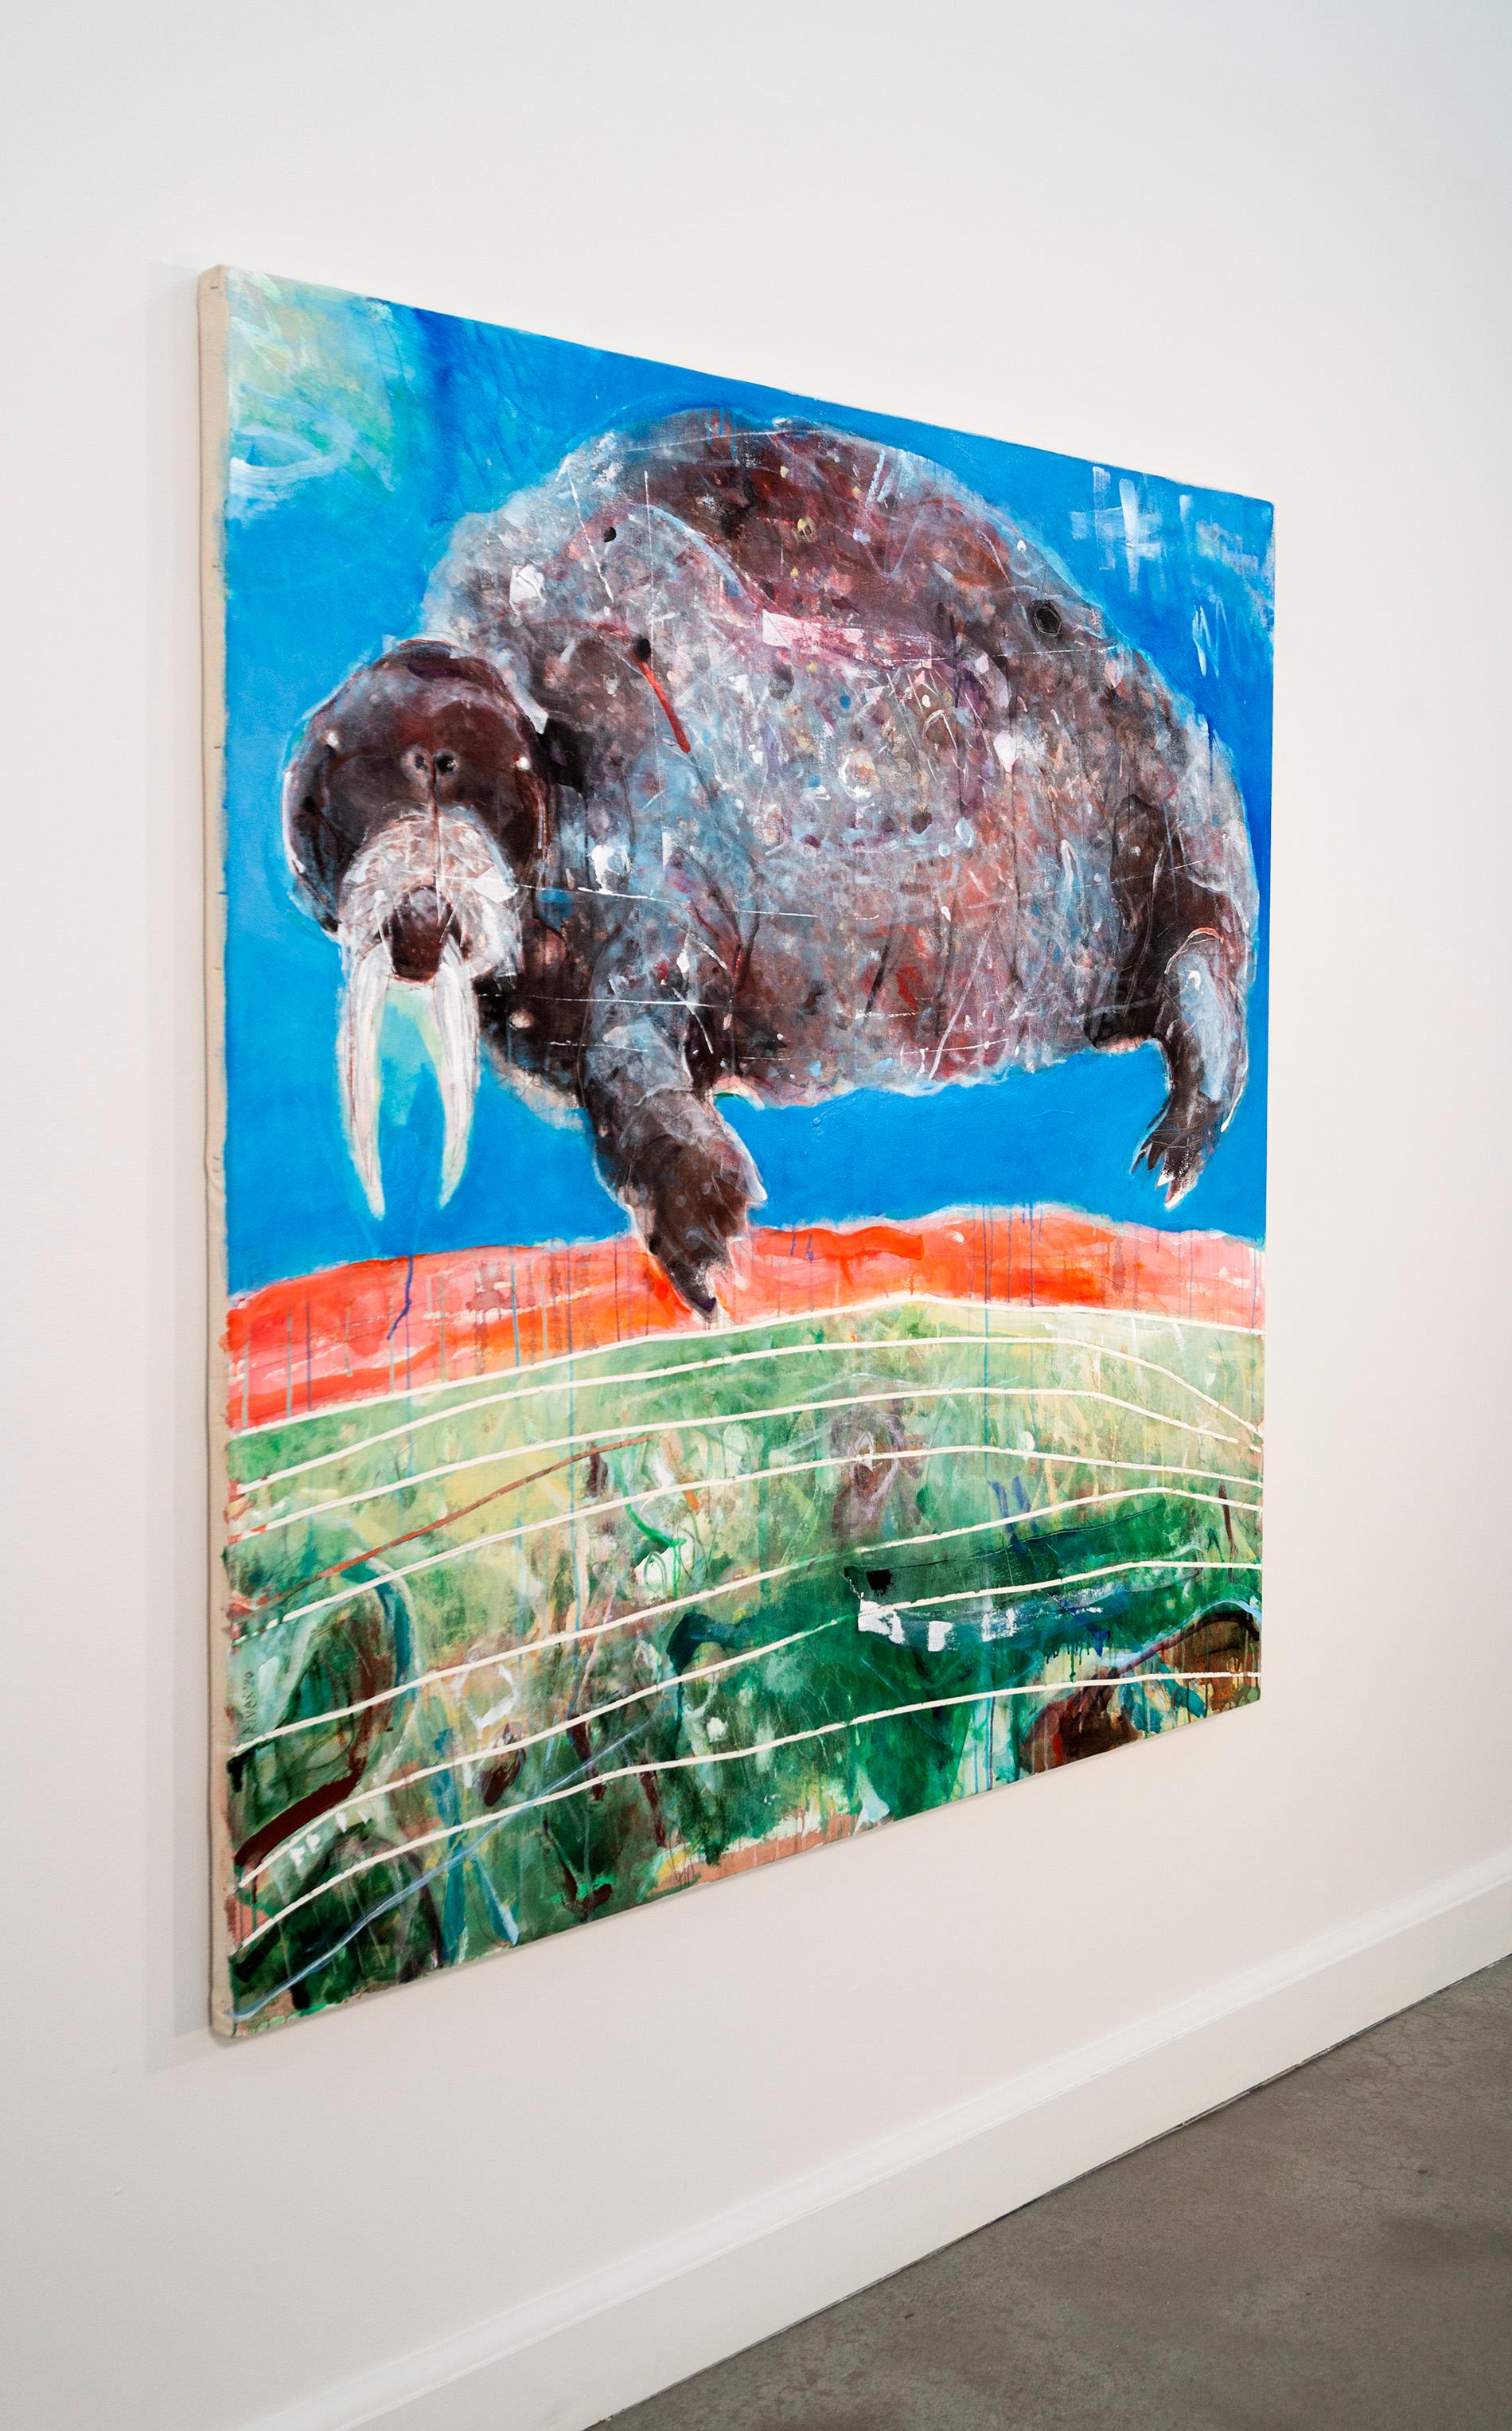 The walrus, an impressively large Arctic animal dominates the canvas in this expressive abstract painting by Rick Rivet. The Metis artist has acquired an international reputation for his contemporary artwork which often offers a poetic, spiritual